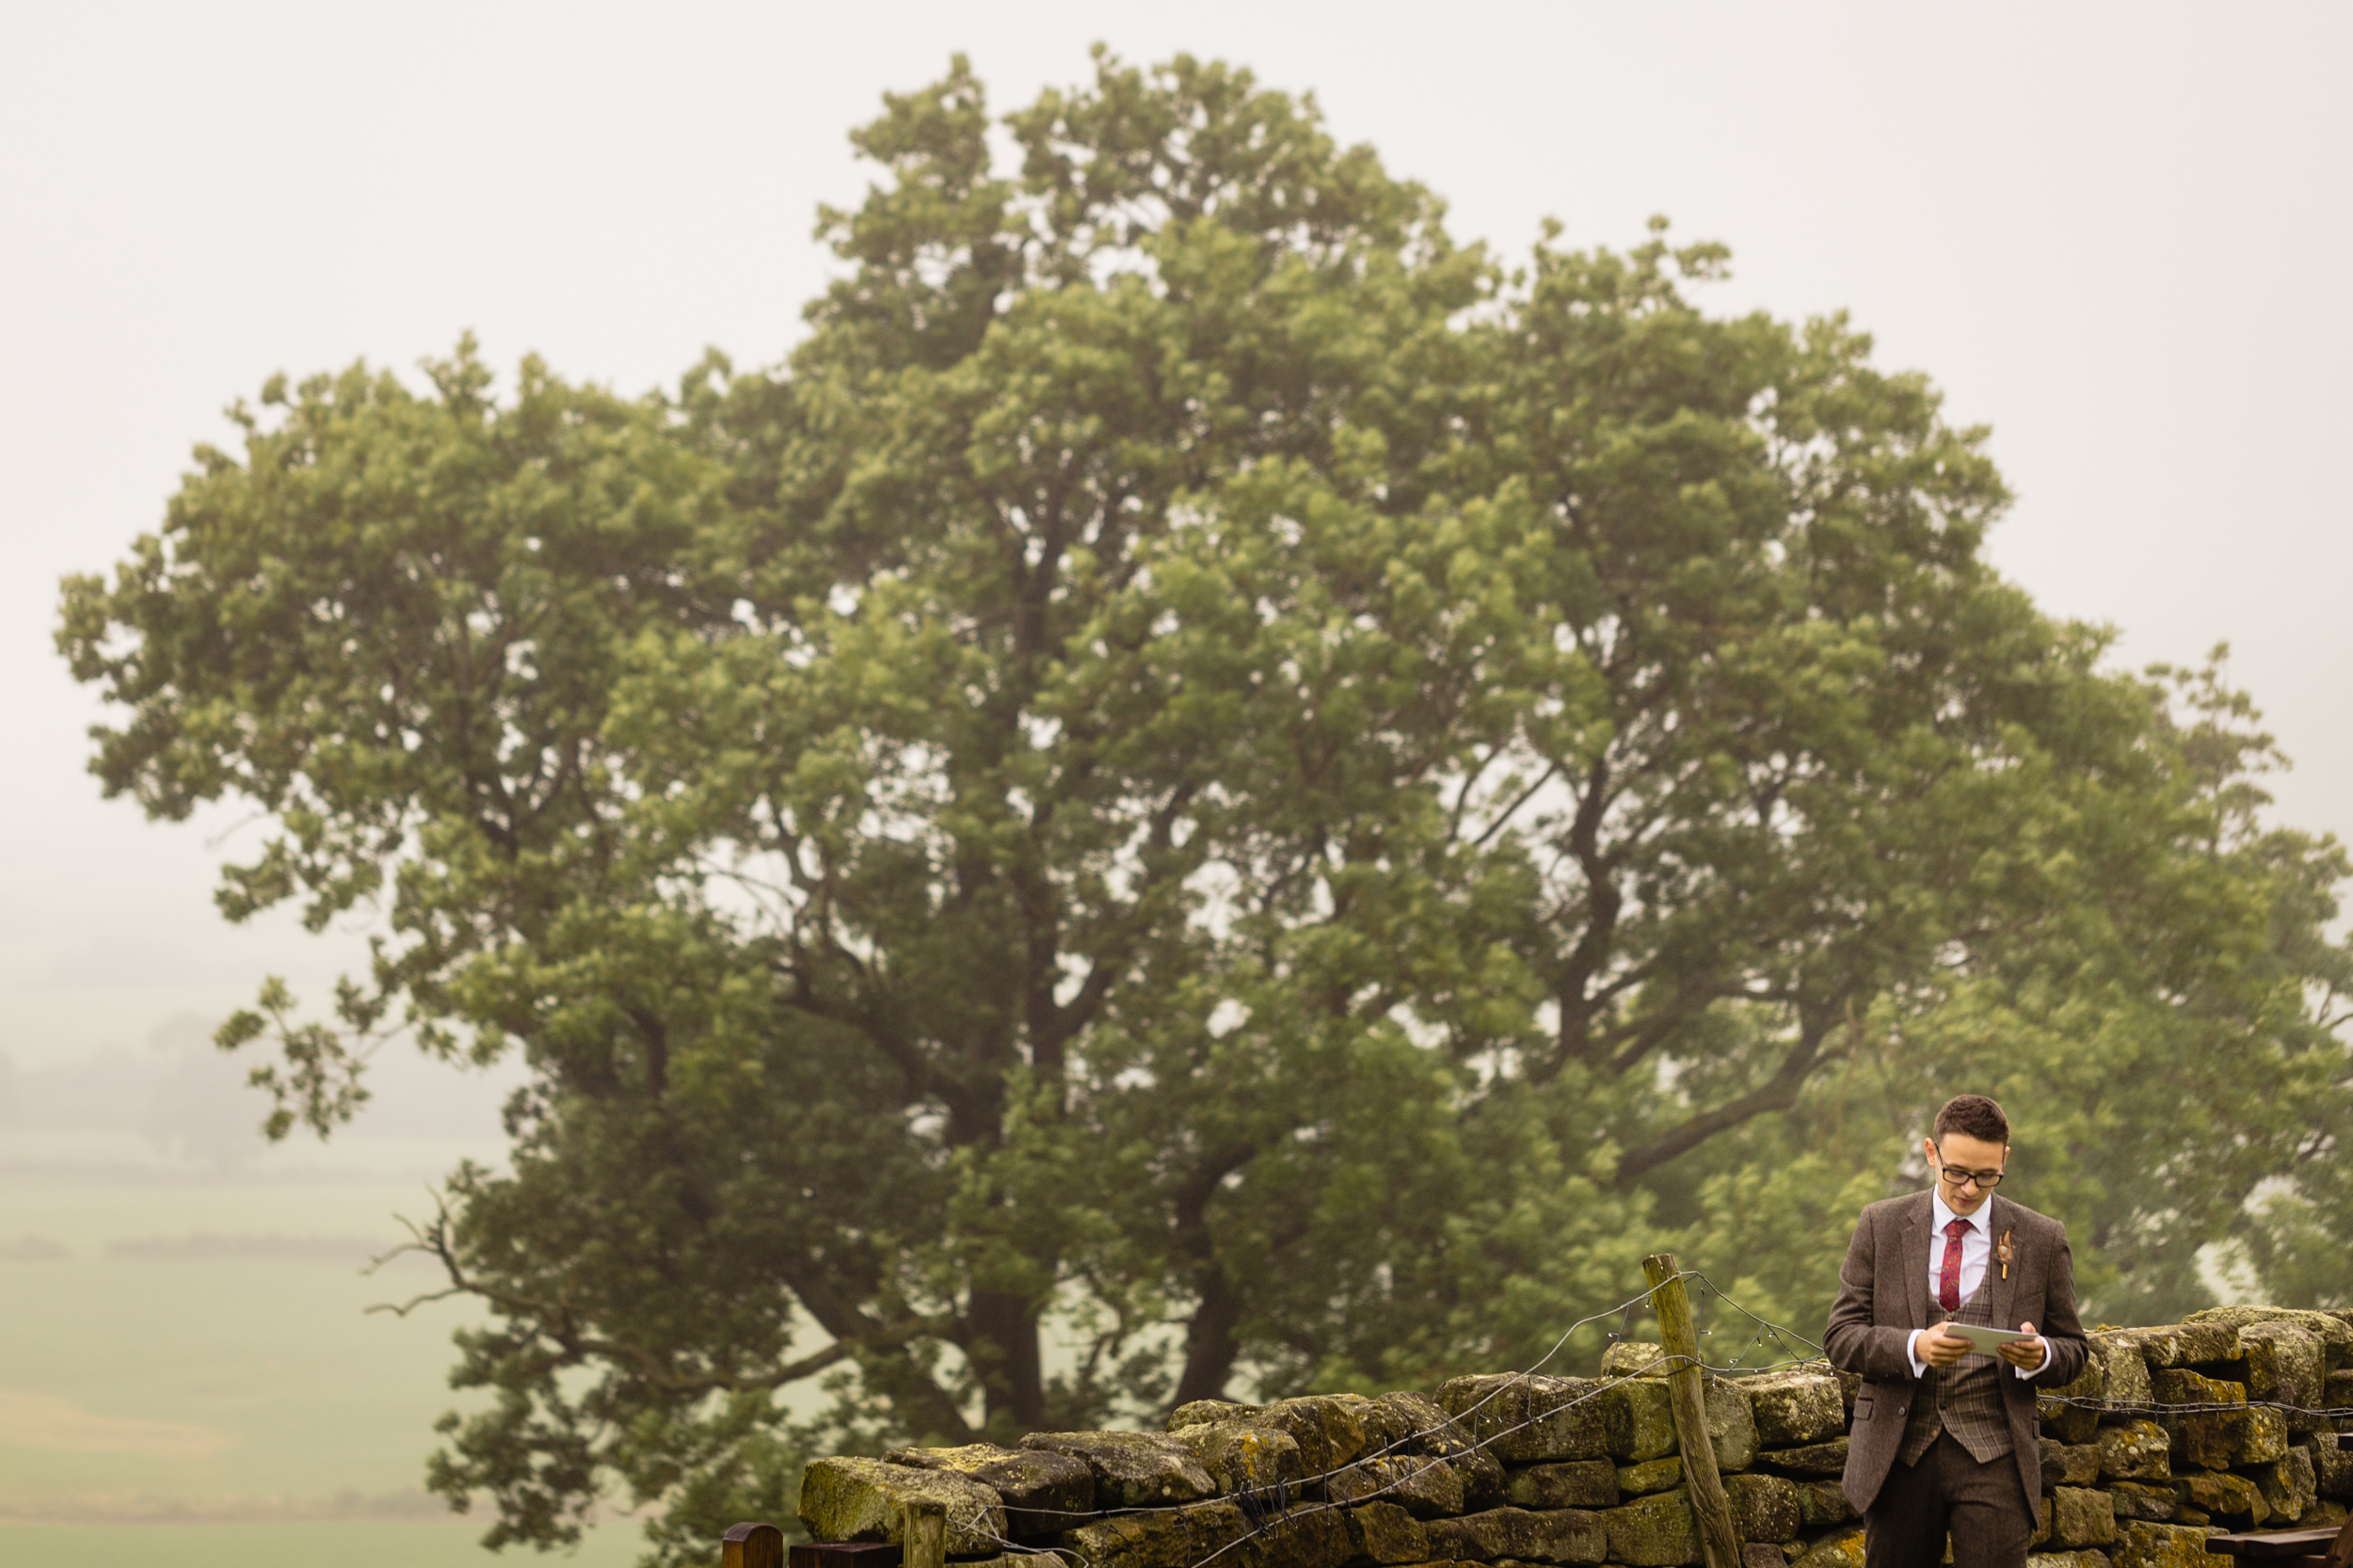 best man practicing his speech. esk valley wedding photography by emma and rich.